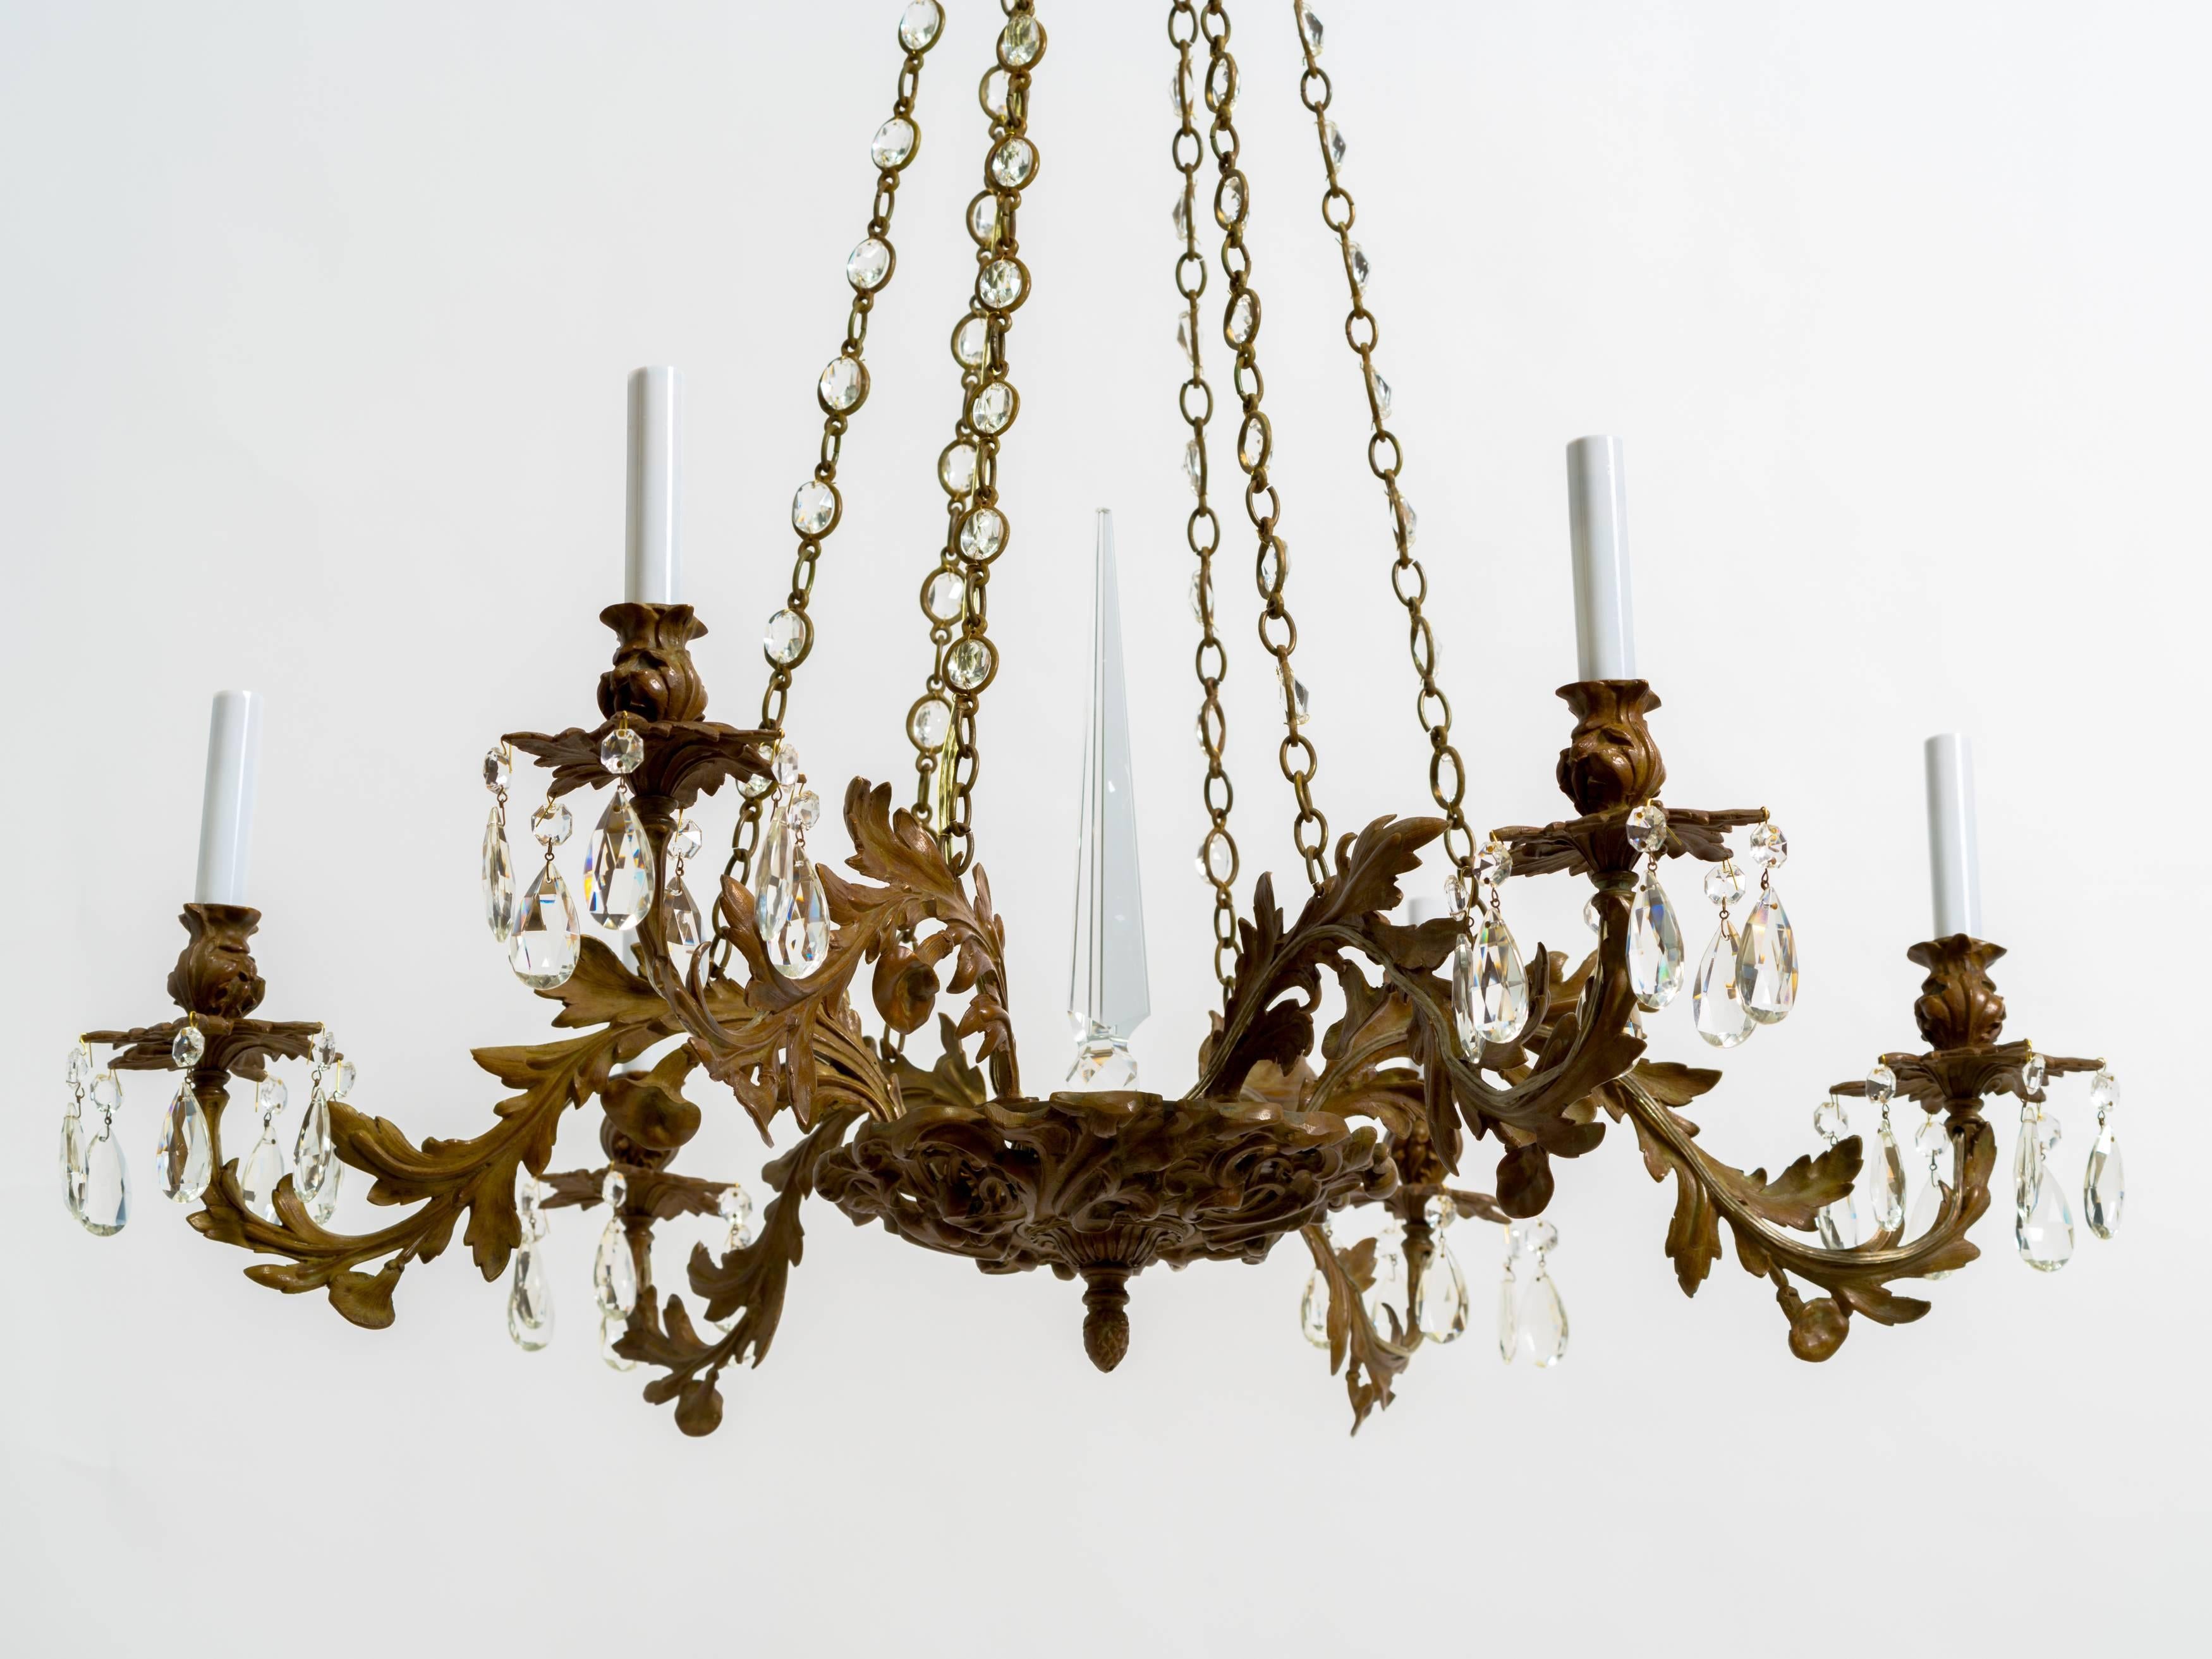 A fine late 19th century bronze nine-light chandelier with acanthus leaves design on arms. Beautiful patina.
Faceted glass prisms and obelisk at the centre
A great example of good craftsmanship.
Professionally restored and rewired.
Arms: Max.